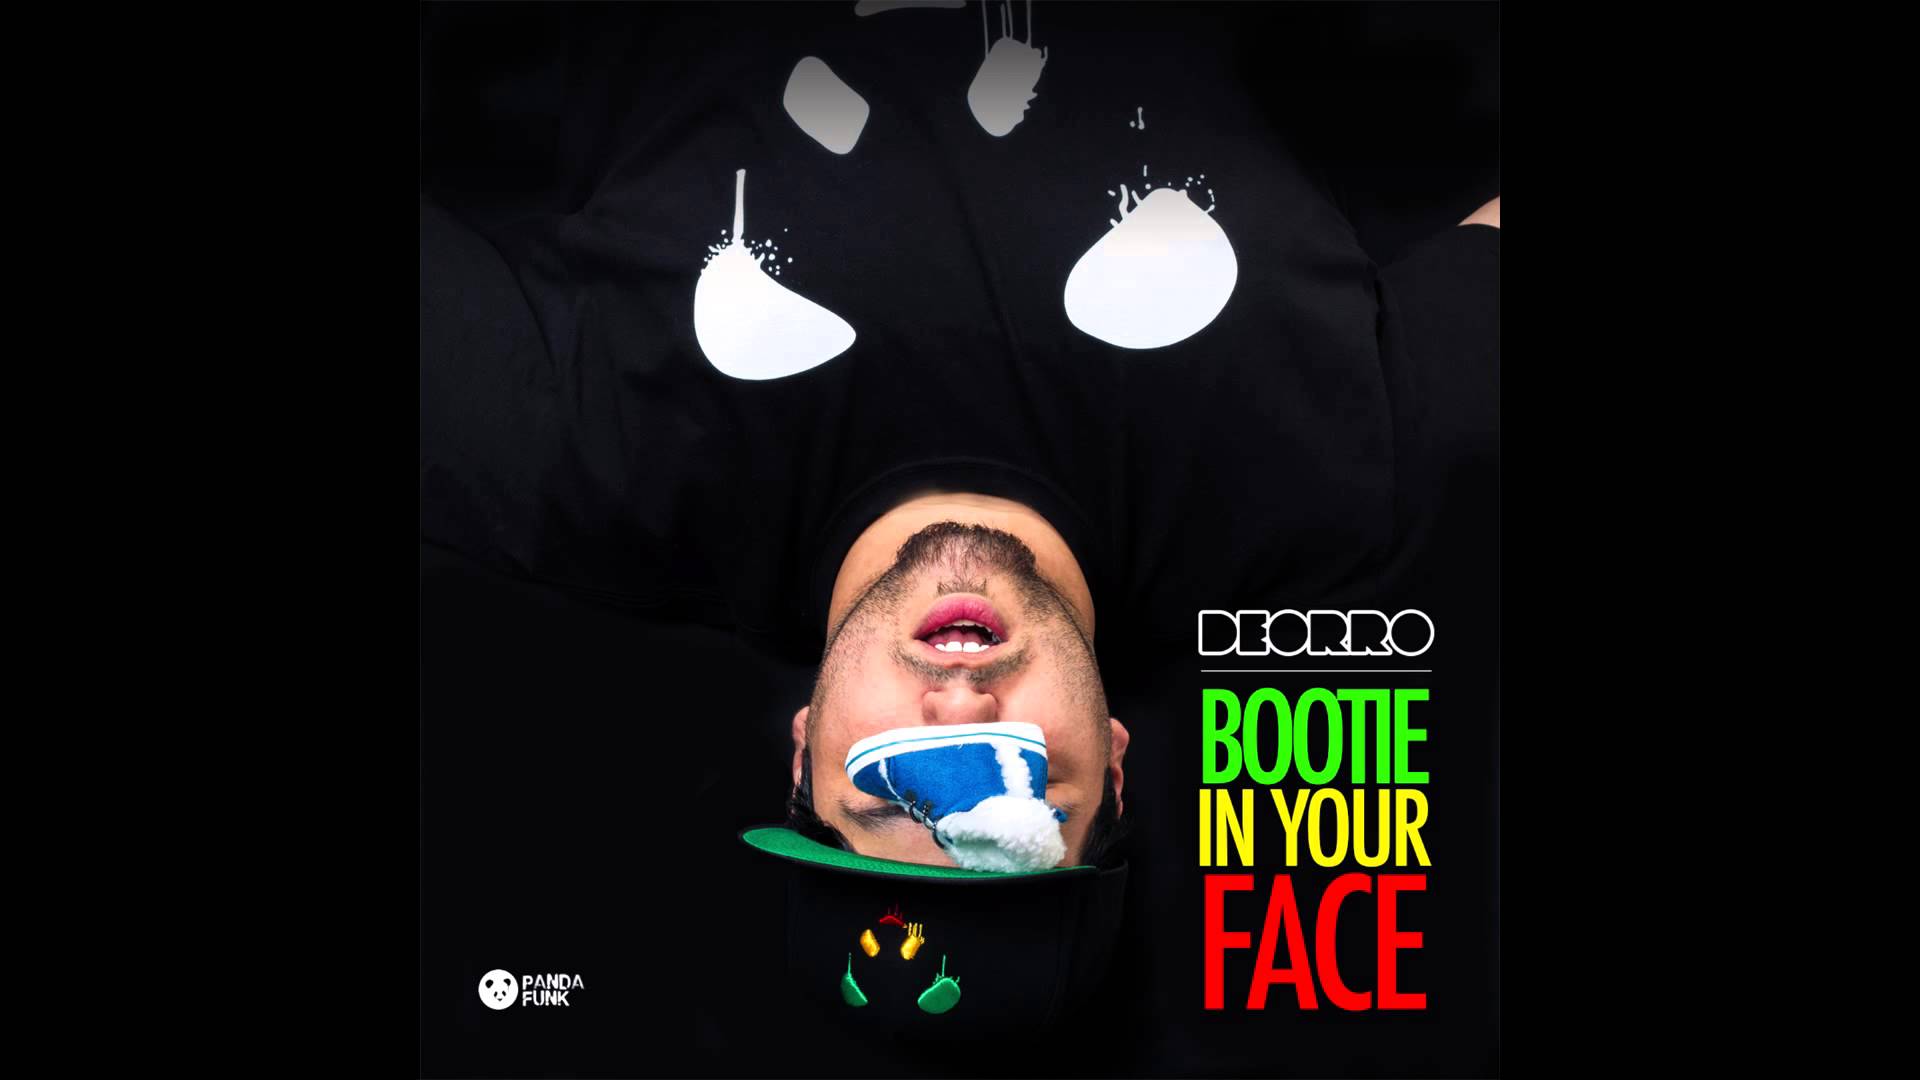 Deorro - Bootie In Your Face (Cover Art) - YouTube